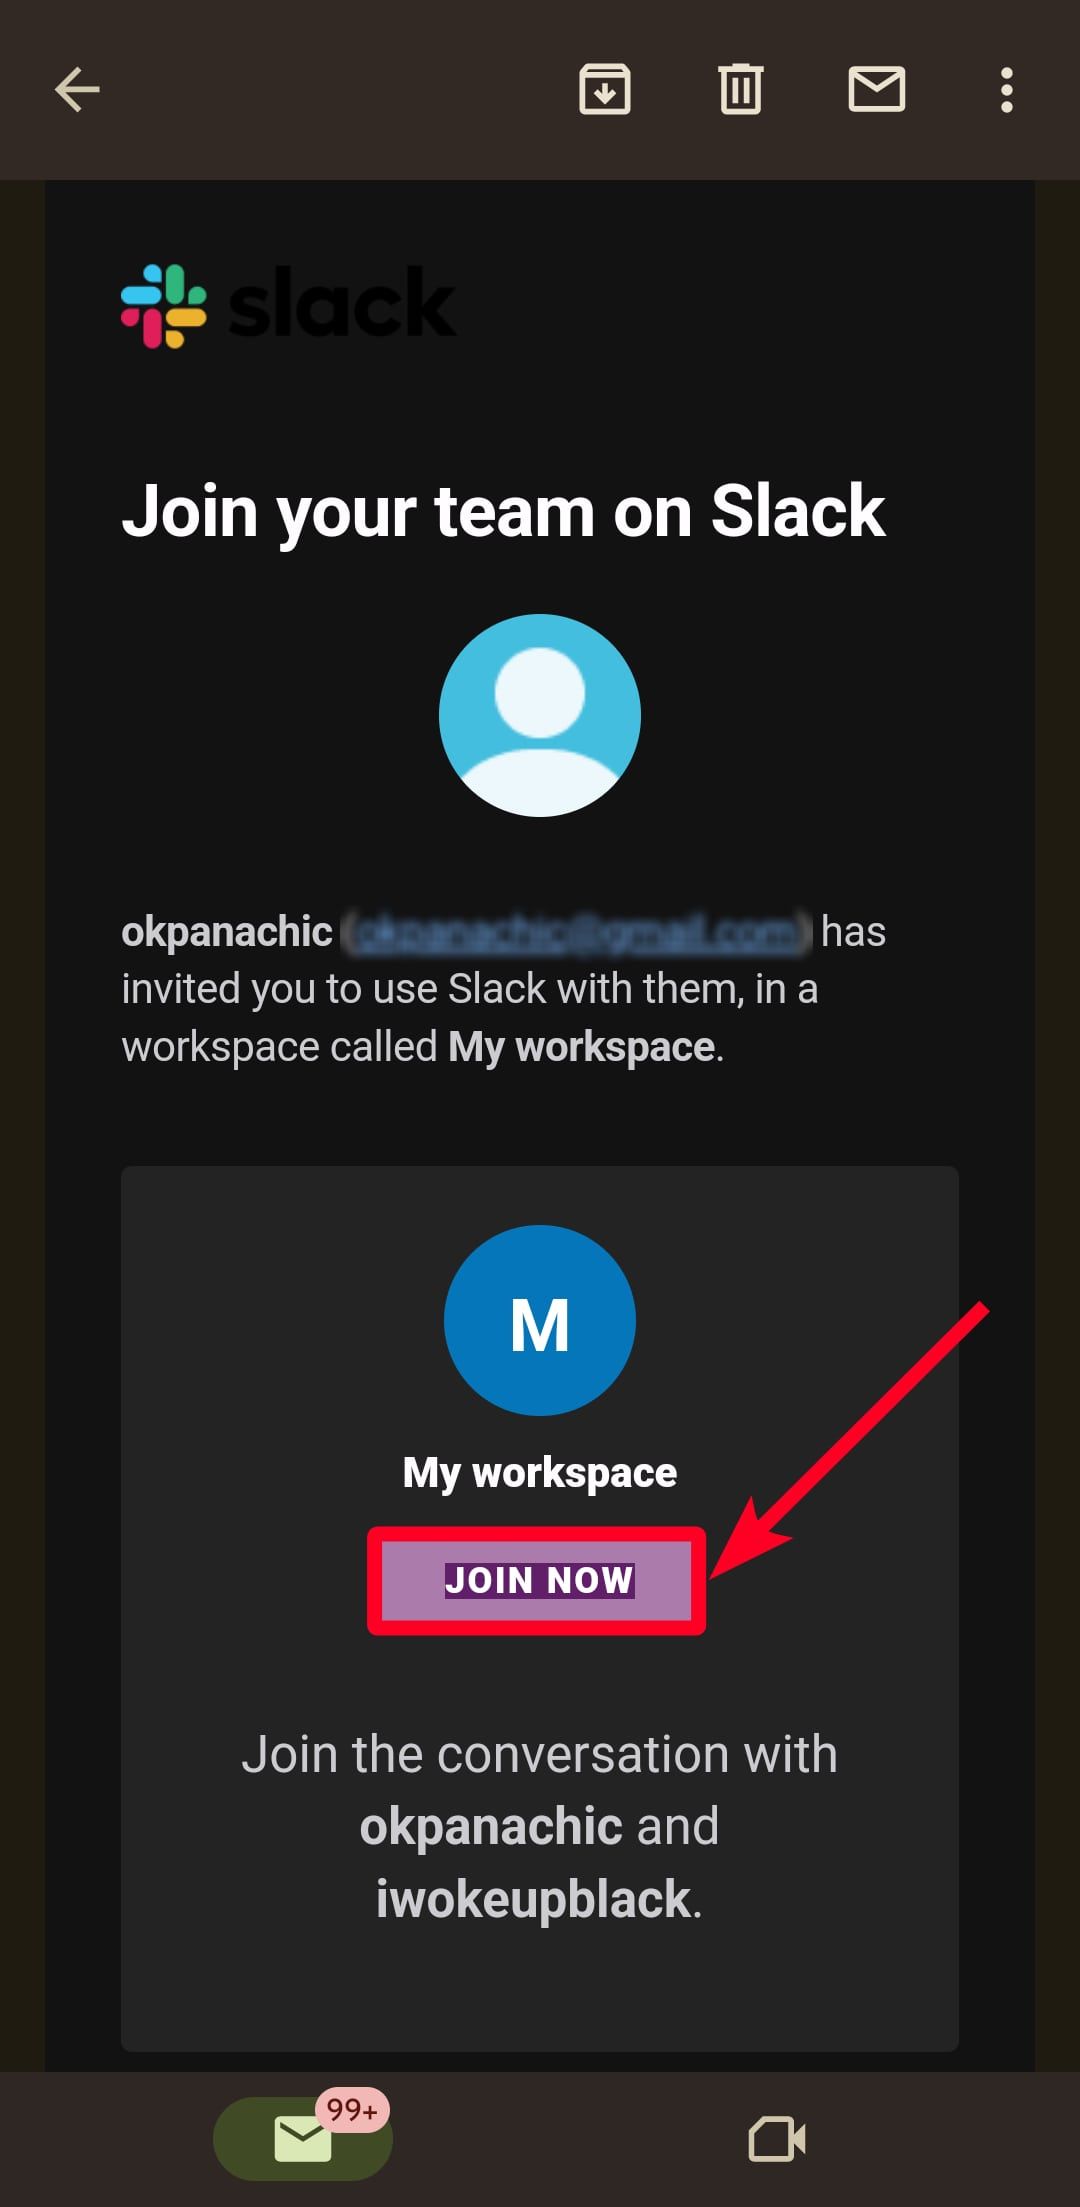 Invitation to a Slack workspace in the Gmail mobile app